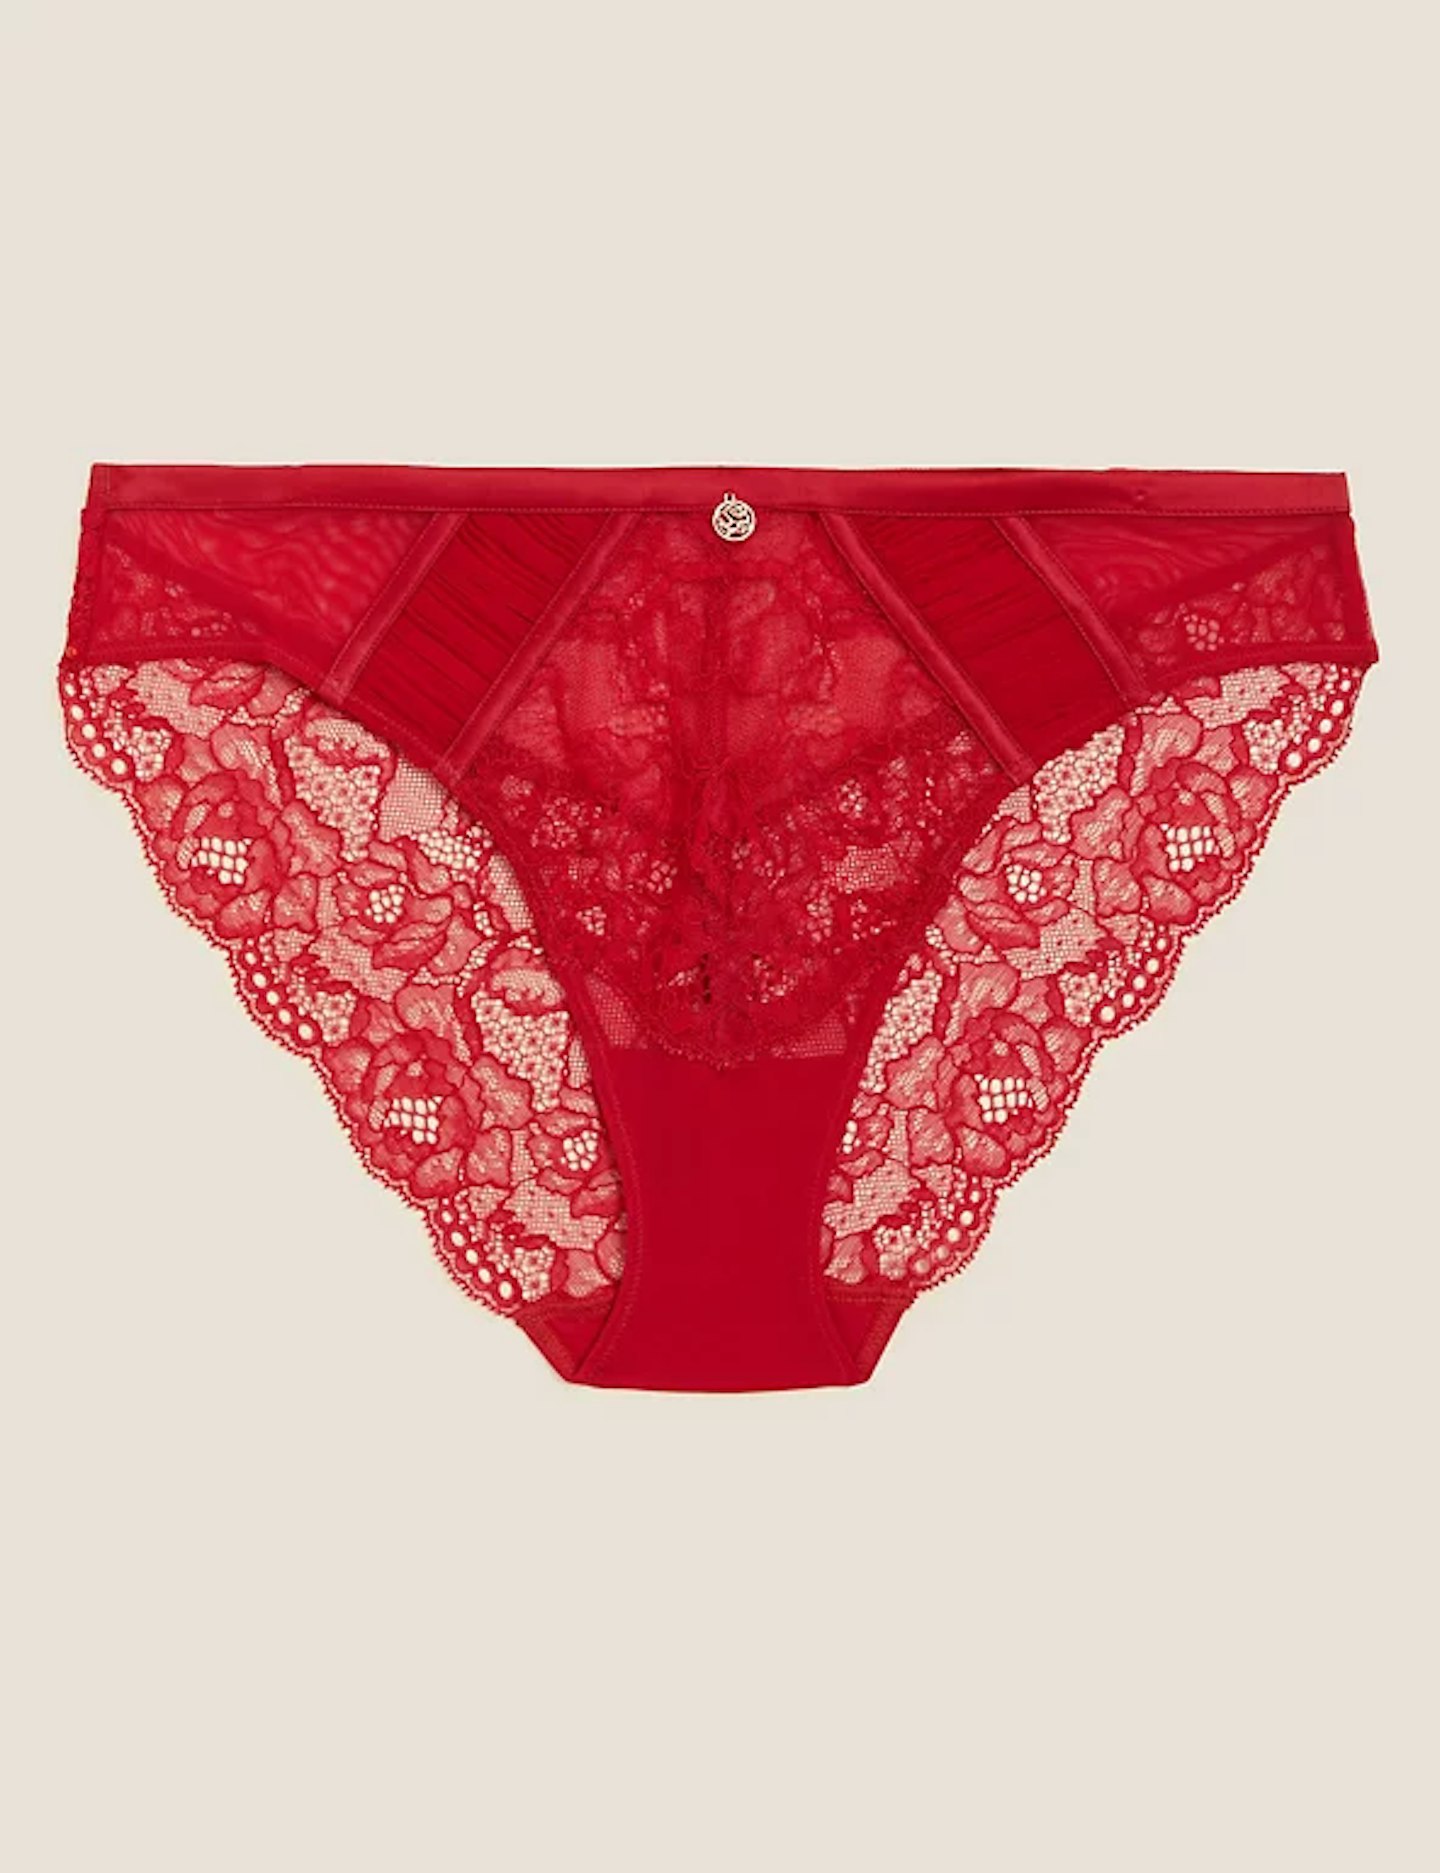 M&S ROSIE Red Silk & Lace High Leg Knicker T816380L Size UK 16 - EUR 44 -  NEW 5000006249255 on eBid United States